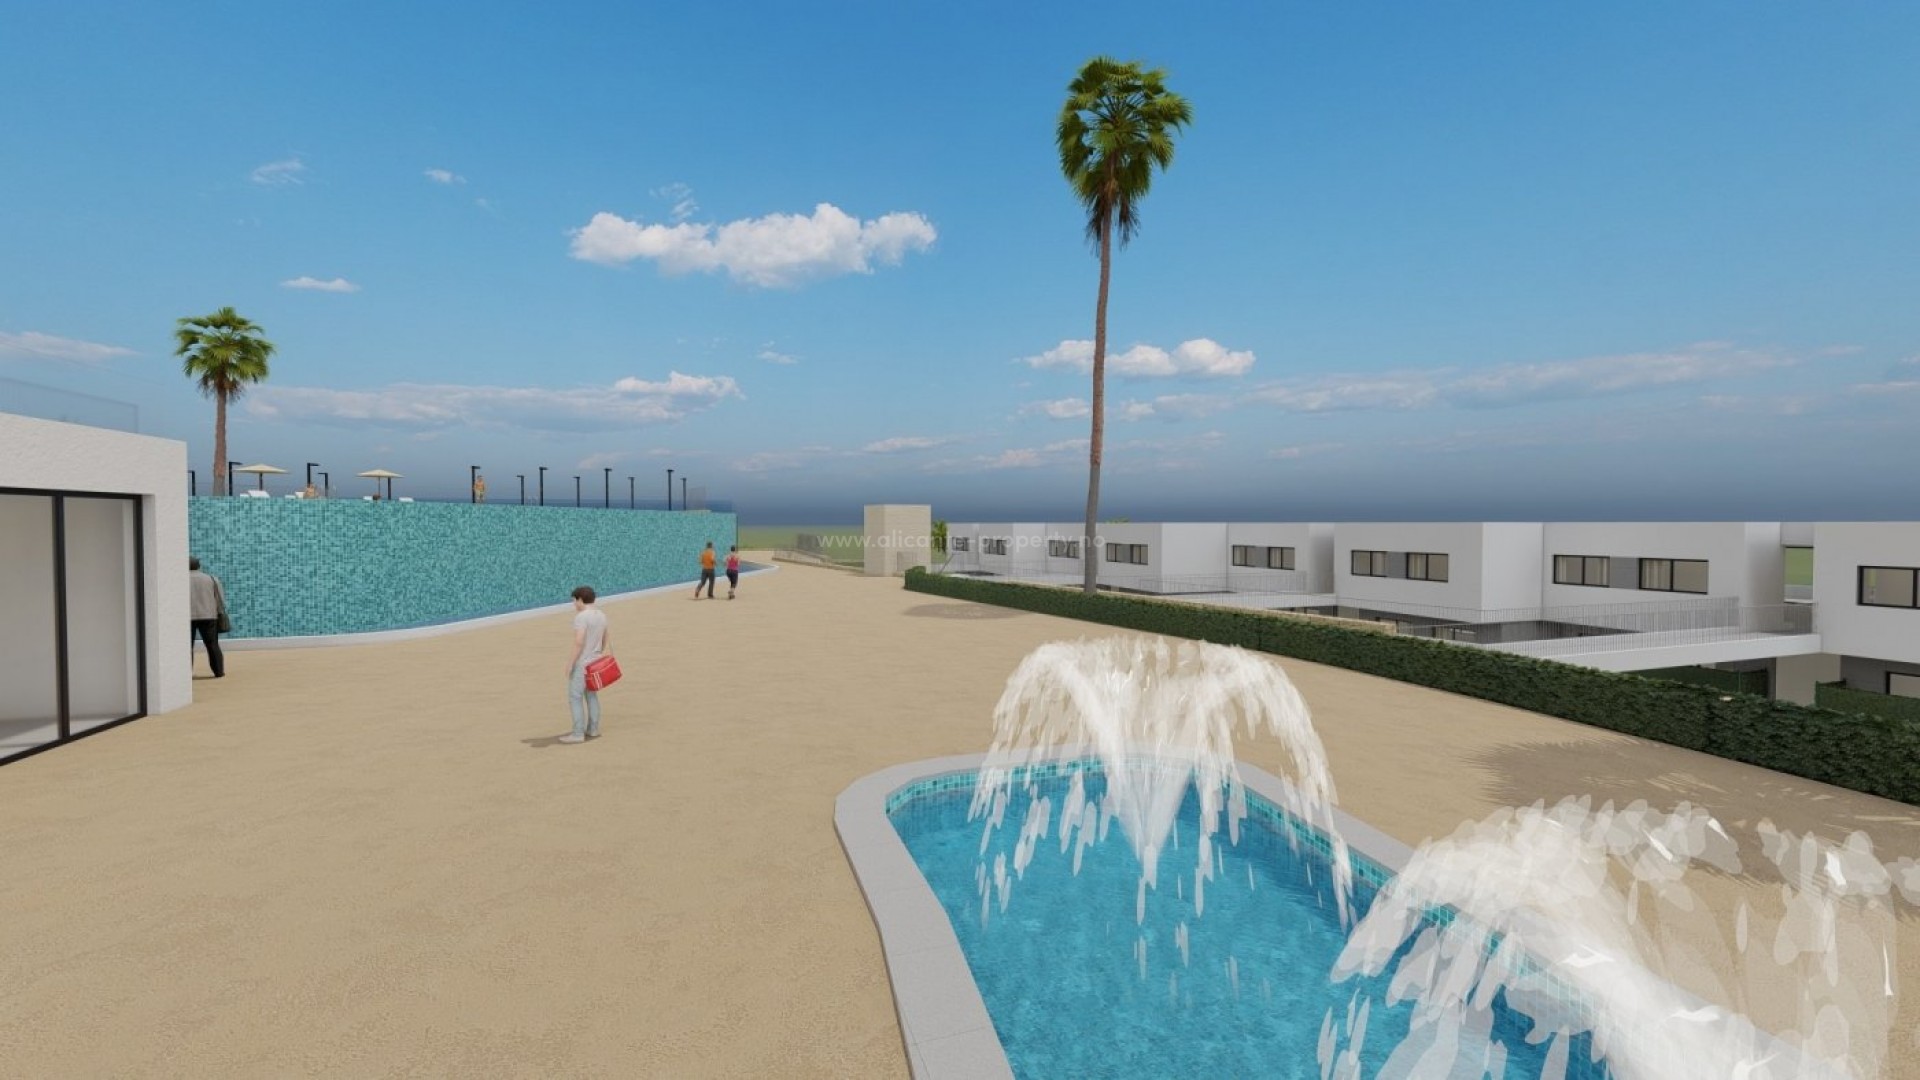 New building with small exclusive flats/bungalows in Camporrosso in Finestrat, 2 bedrooms, 2 bathrooms. Common area with infinity pool, gym, garden, meeting room